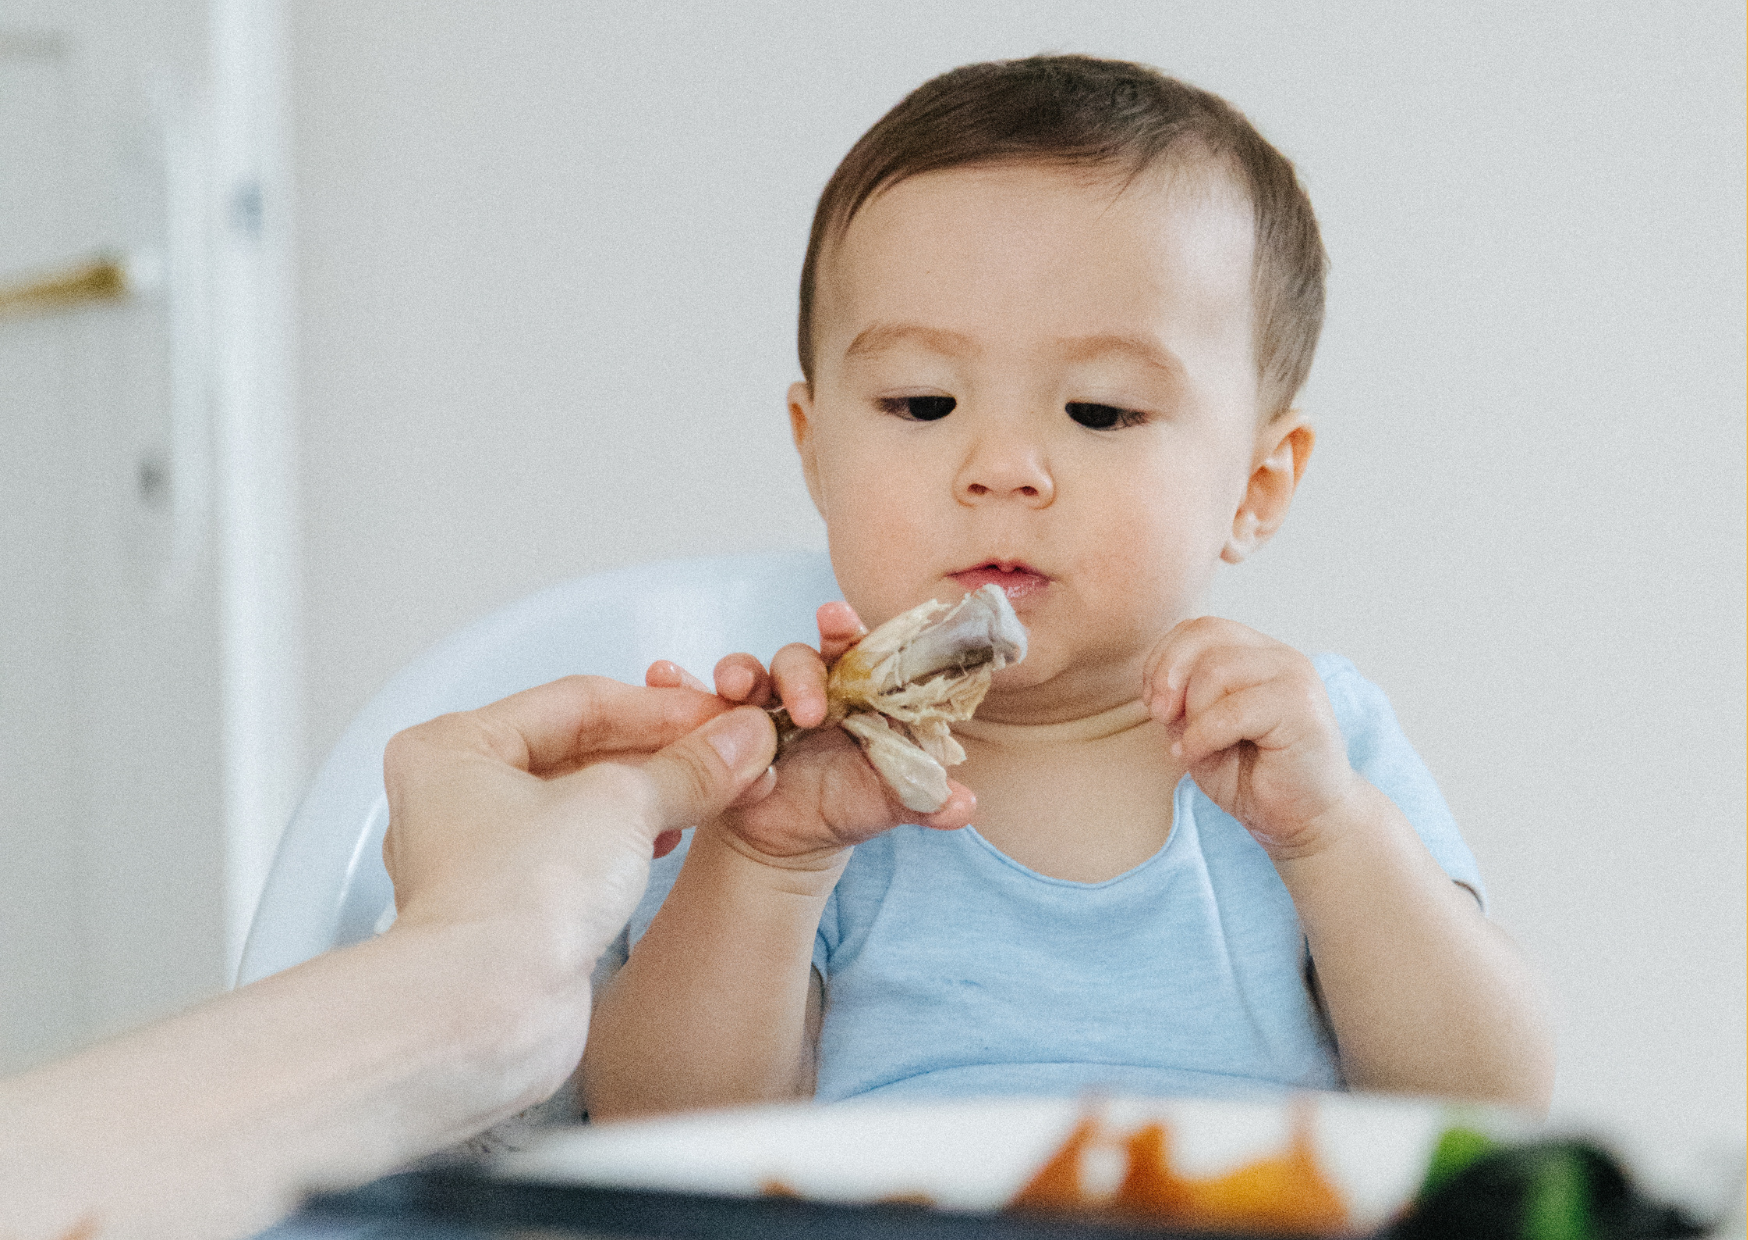 Tips for Developing Healthy Eating Habits in Children